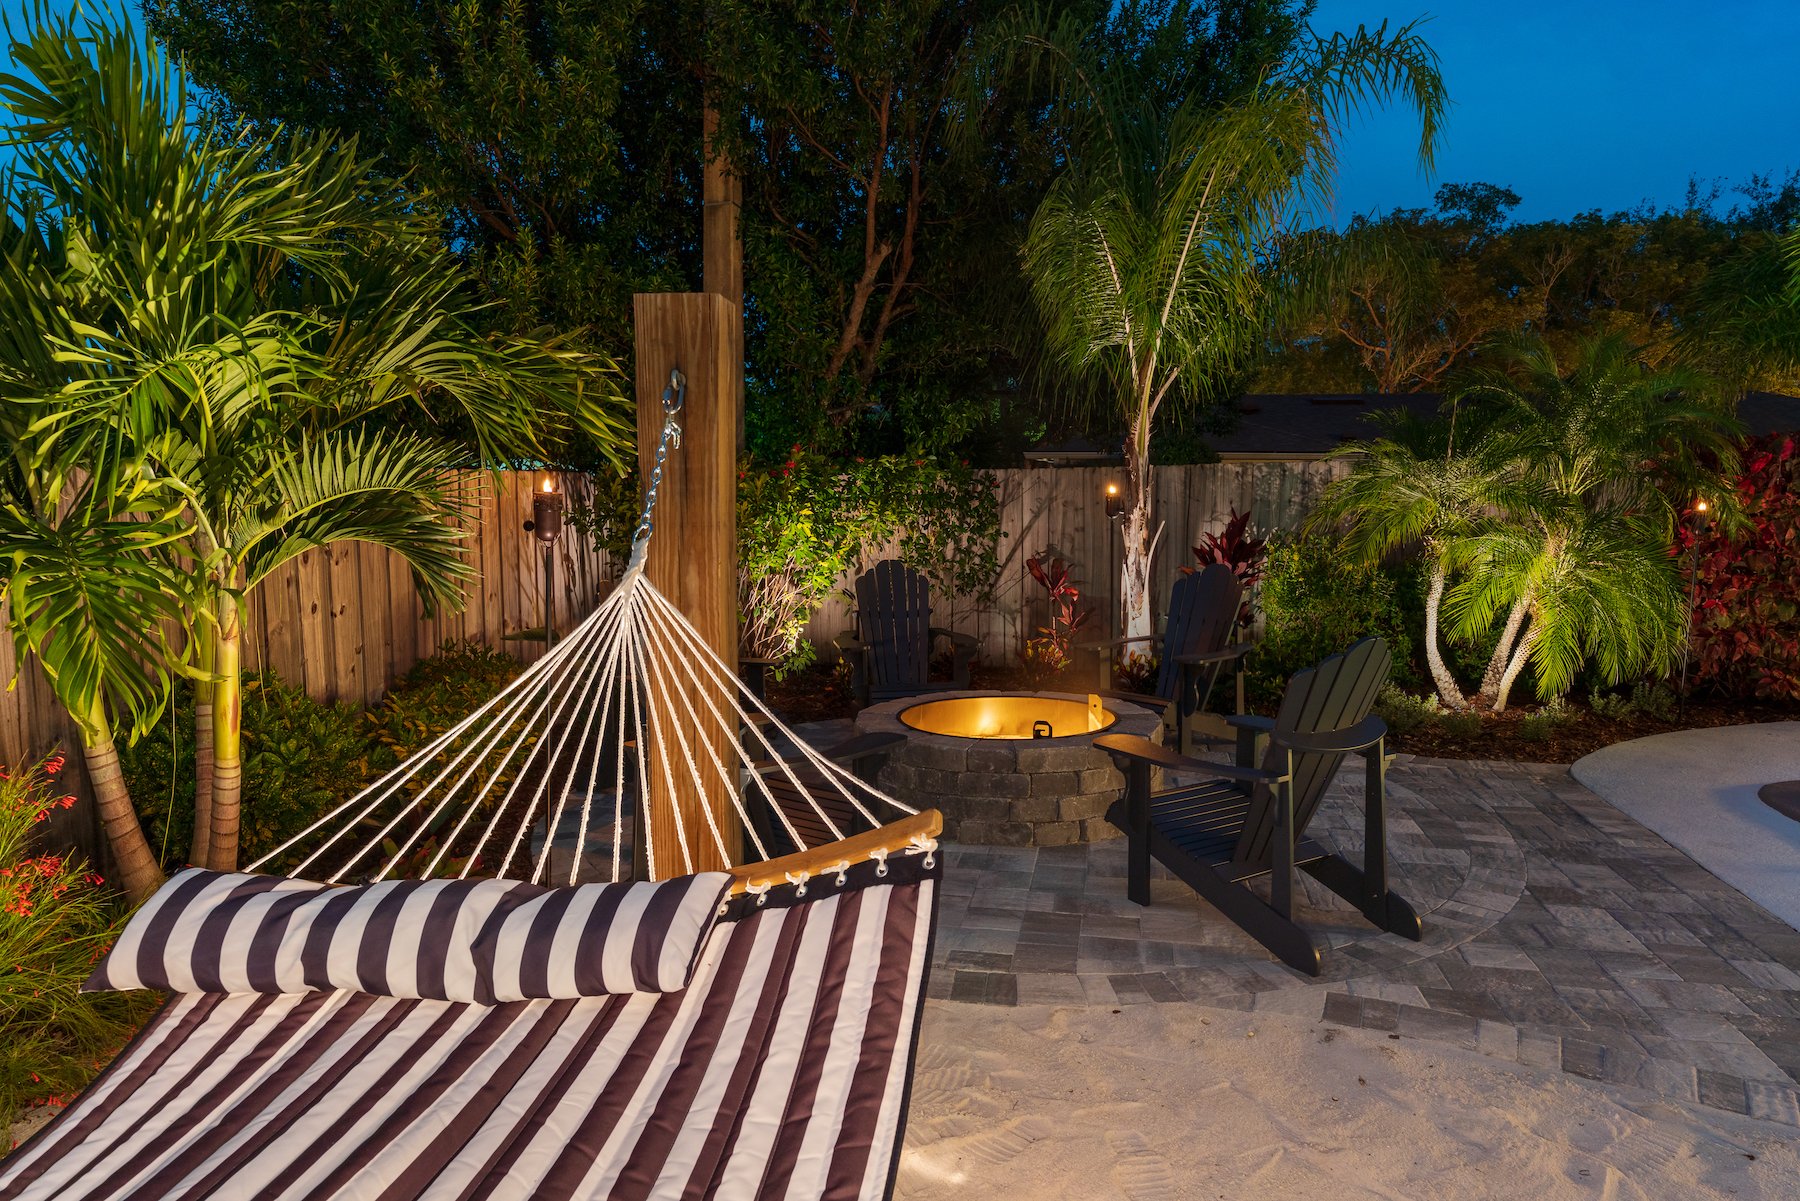 Pool side firepit and beach